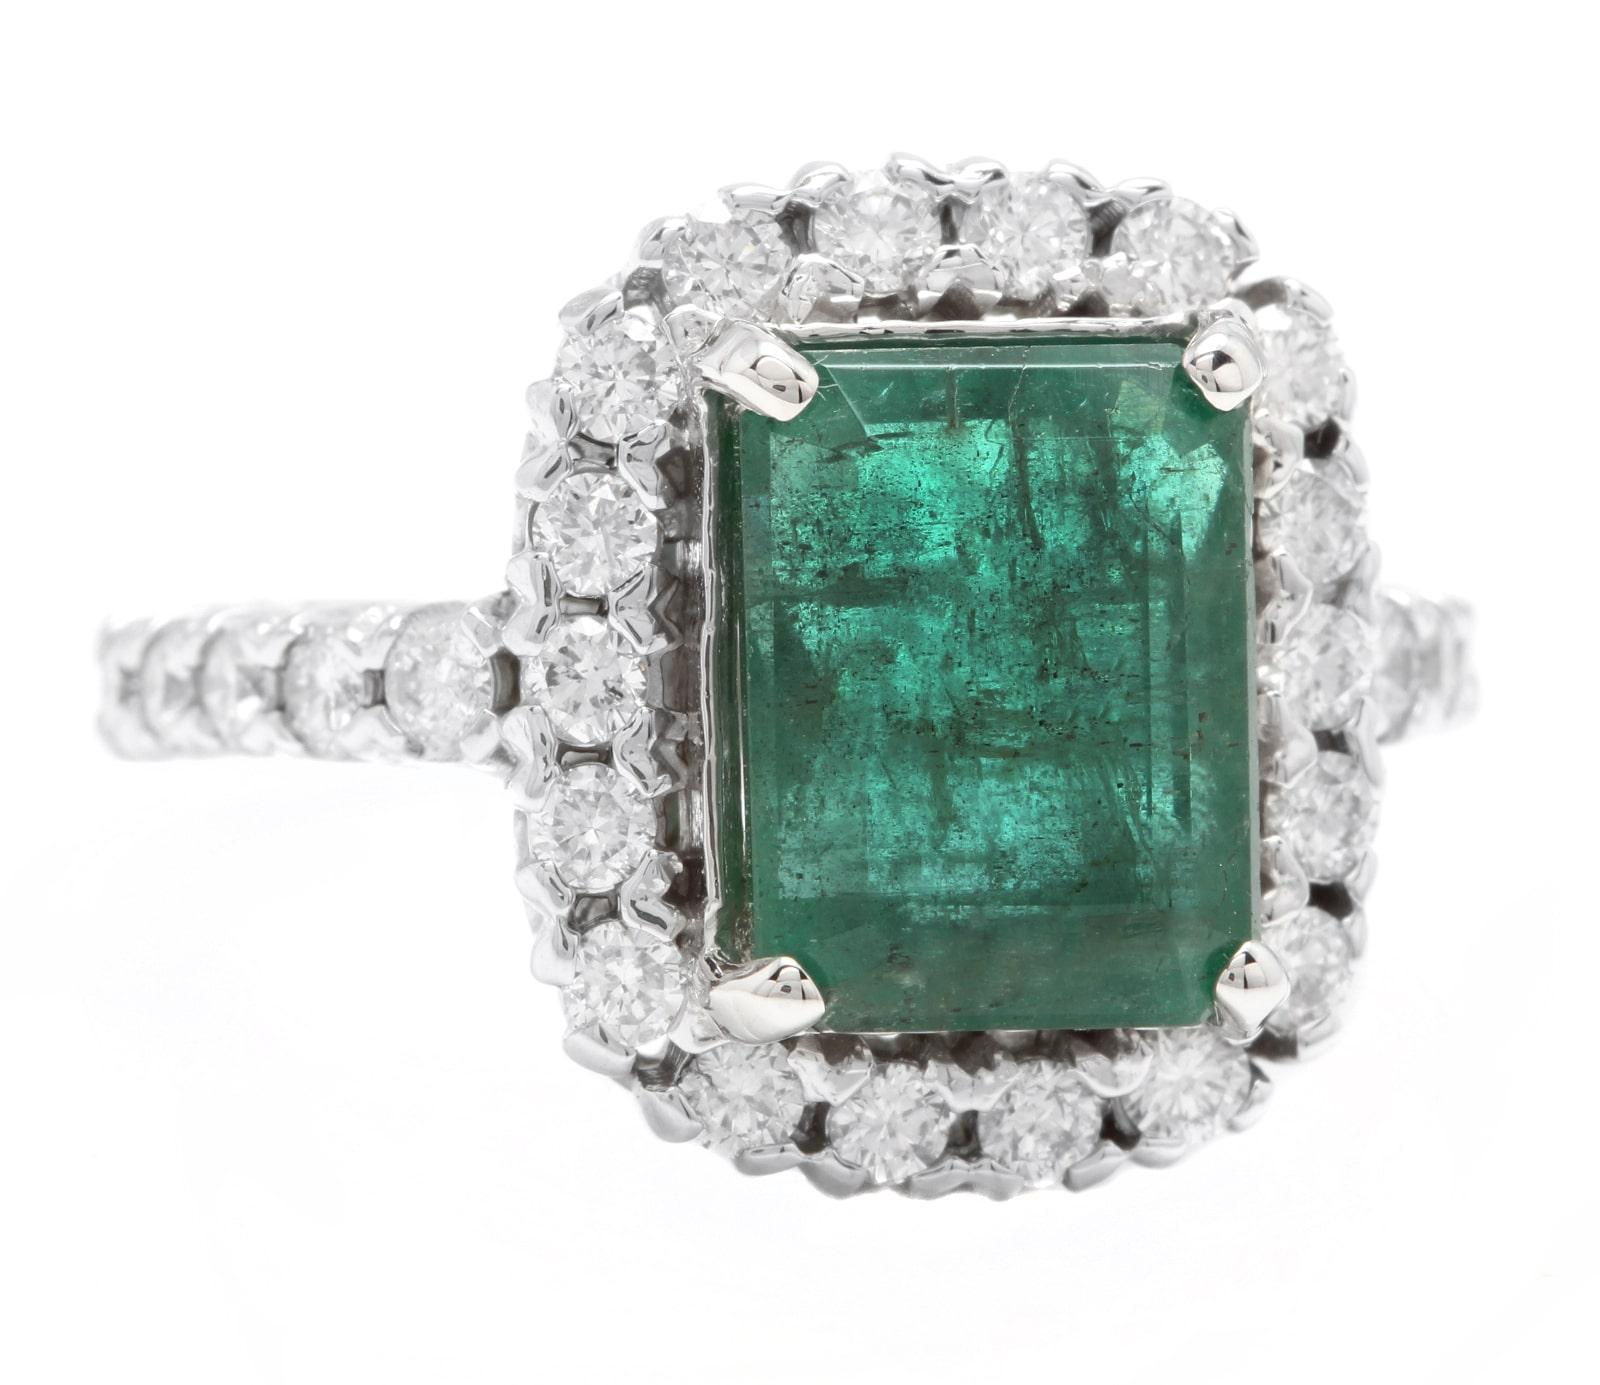 5.50 Carats Natural Emerald and Diamond 14K Solid White Gold Ring

Suggested Replacement Value: Approx. $6,800.00

Total Natural Green Emerald Weight is: Approx. 4.50 Carats (transparent)

Emerald Measures: Approx. 11 x 8mm

Emerald Treatment: